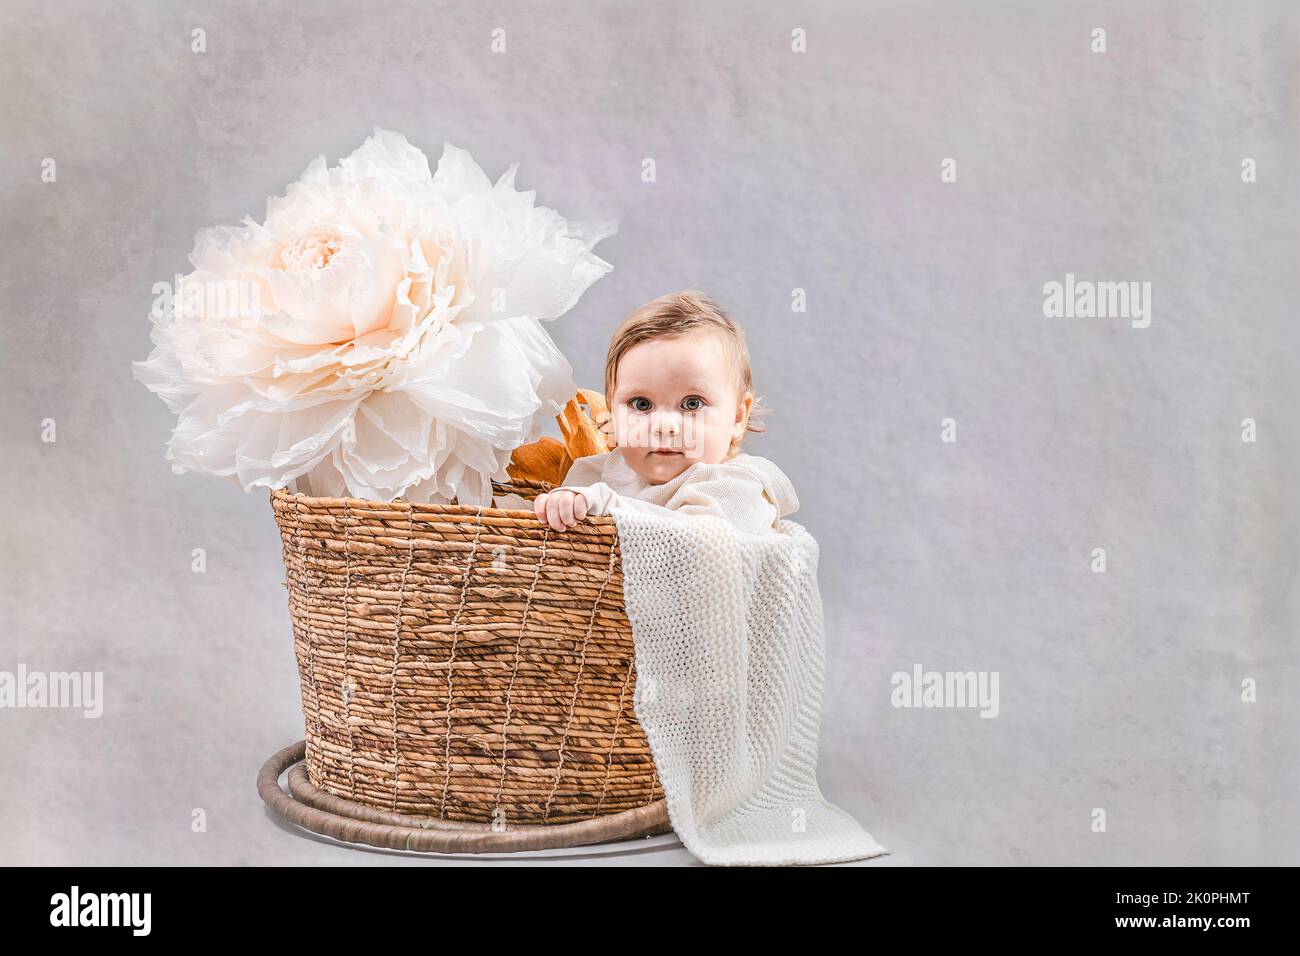 Baby in a basket on a gray background. Isolated photo with studio light. The concept of caring for the baby, preparing for childbirth, happy childhood and spending time with children. Stock Photo